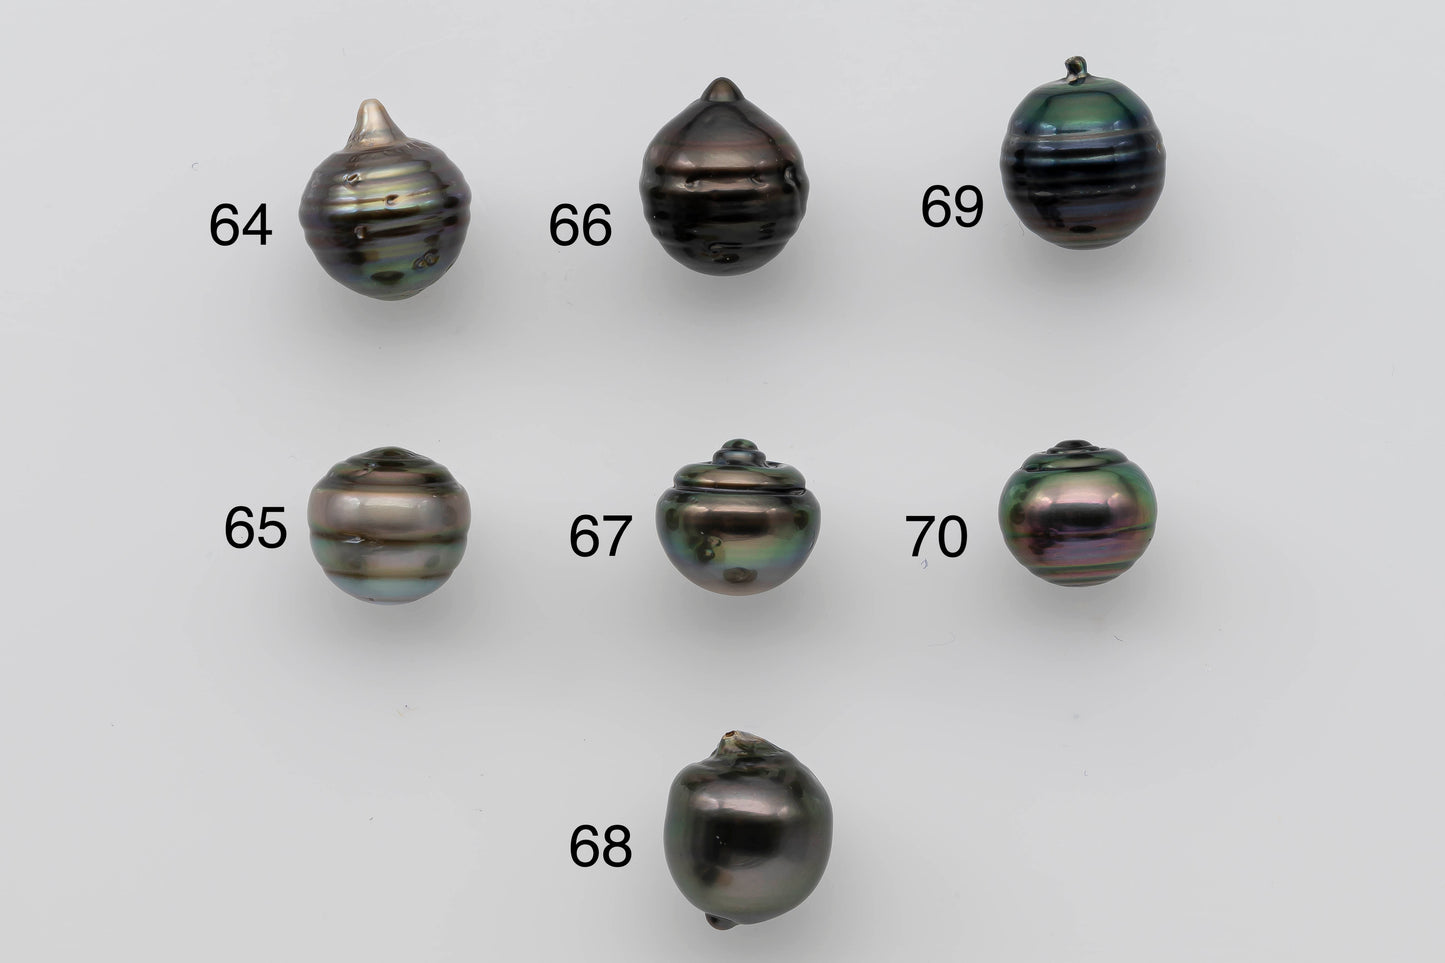 12-13mm Black Loose Tahitian Pearl Teardrop in Natural Color and High Luster for Jewelry Making, SKU # 1280TH